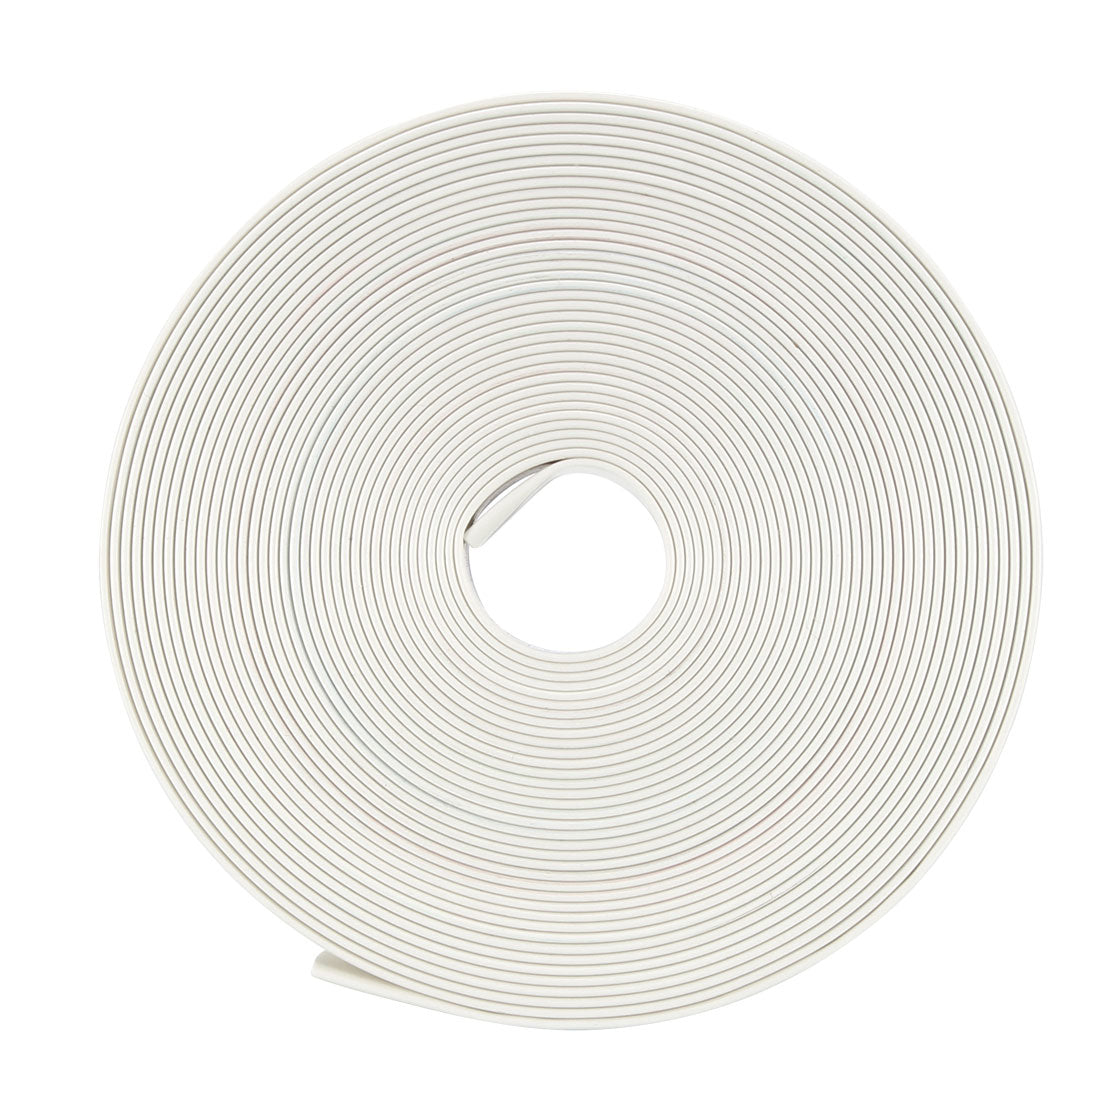 uxcell Uxcell Heat Shrink Tube 2:1 Electrical Insulation Tube Wire Cable Tubing Sleeving Wrap White 12.7mm Diameter 5m Long